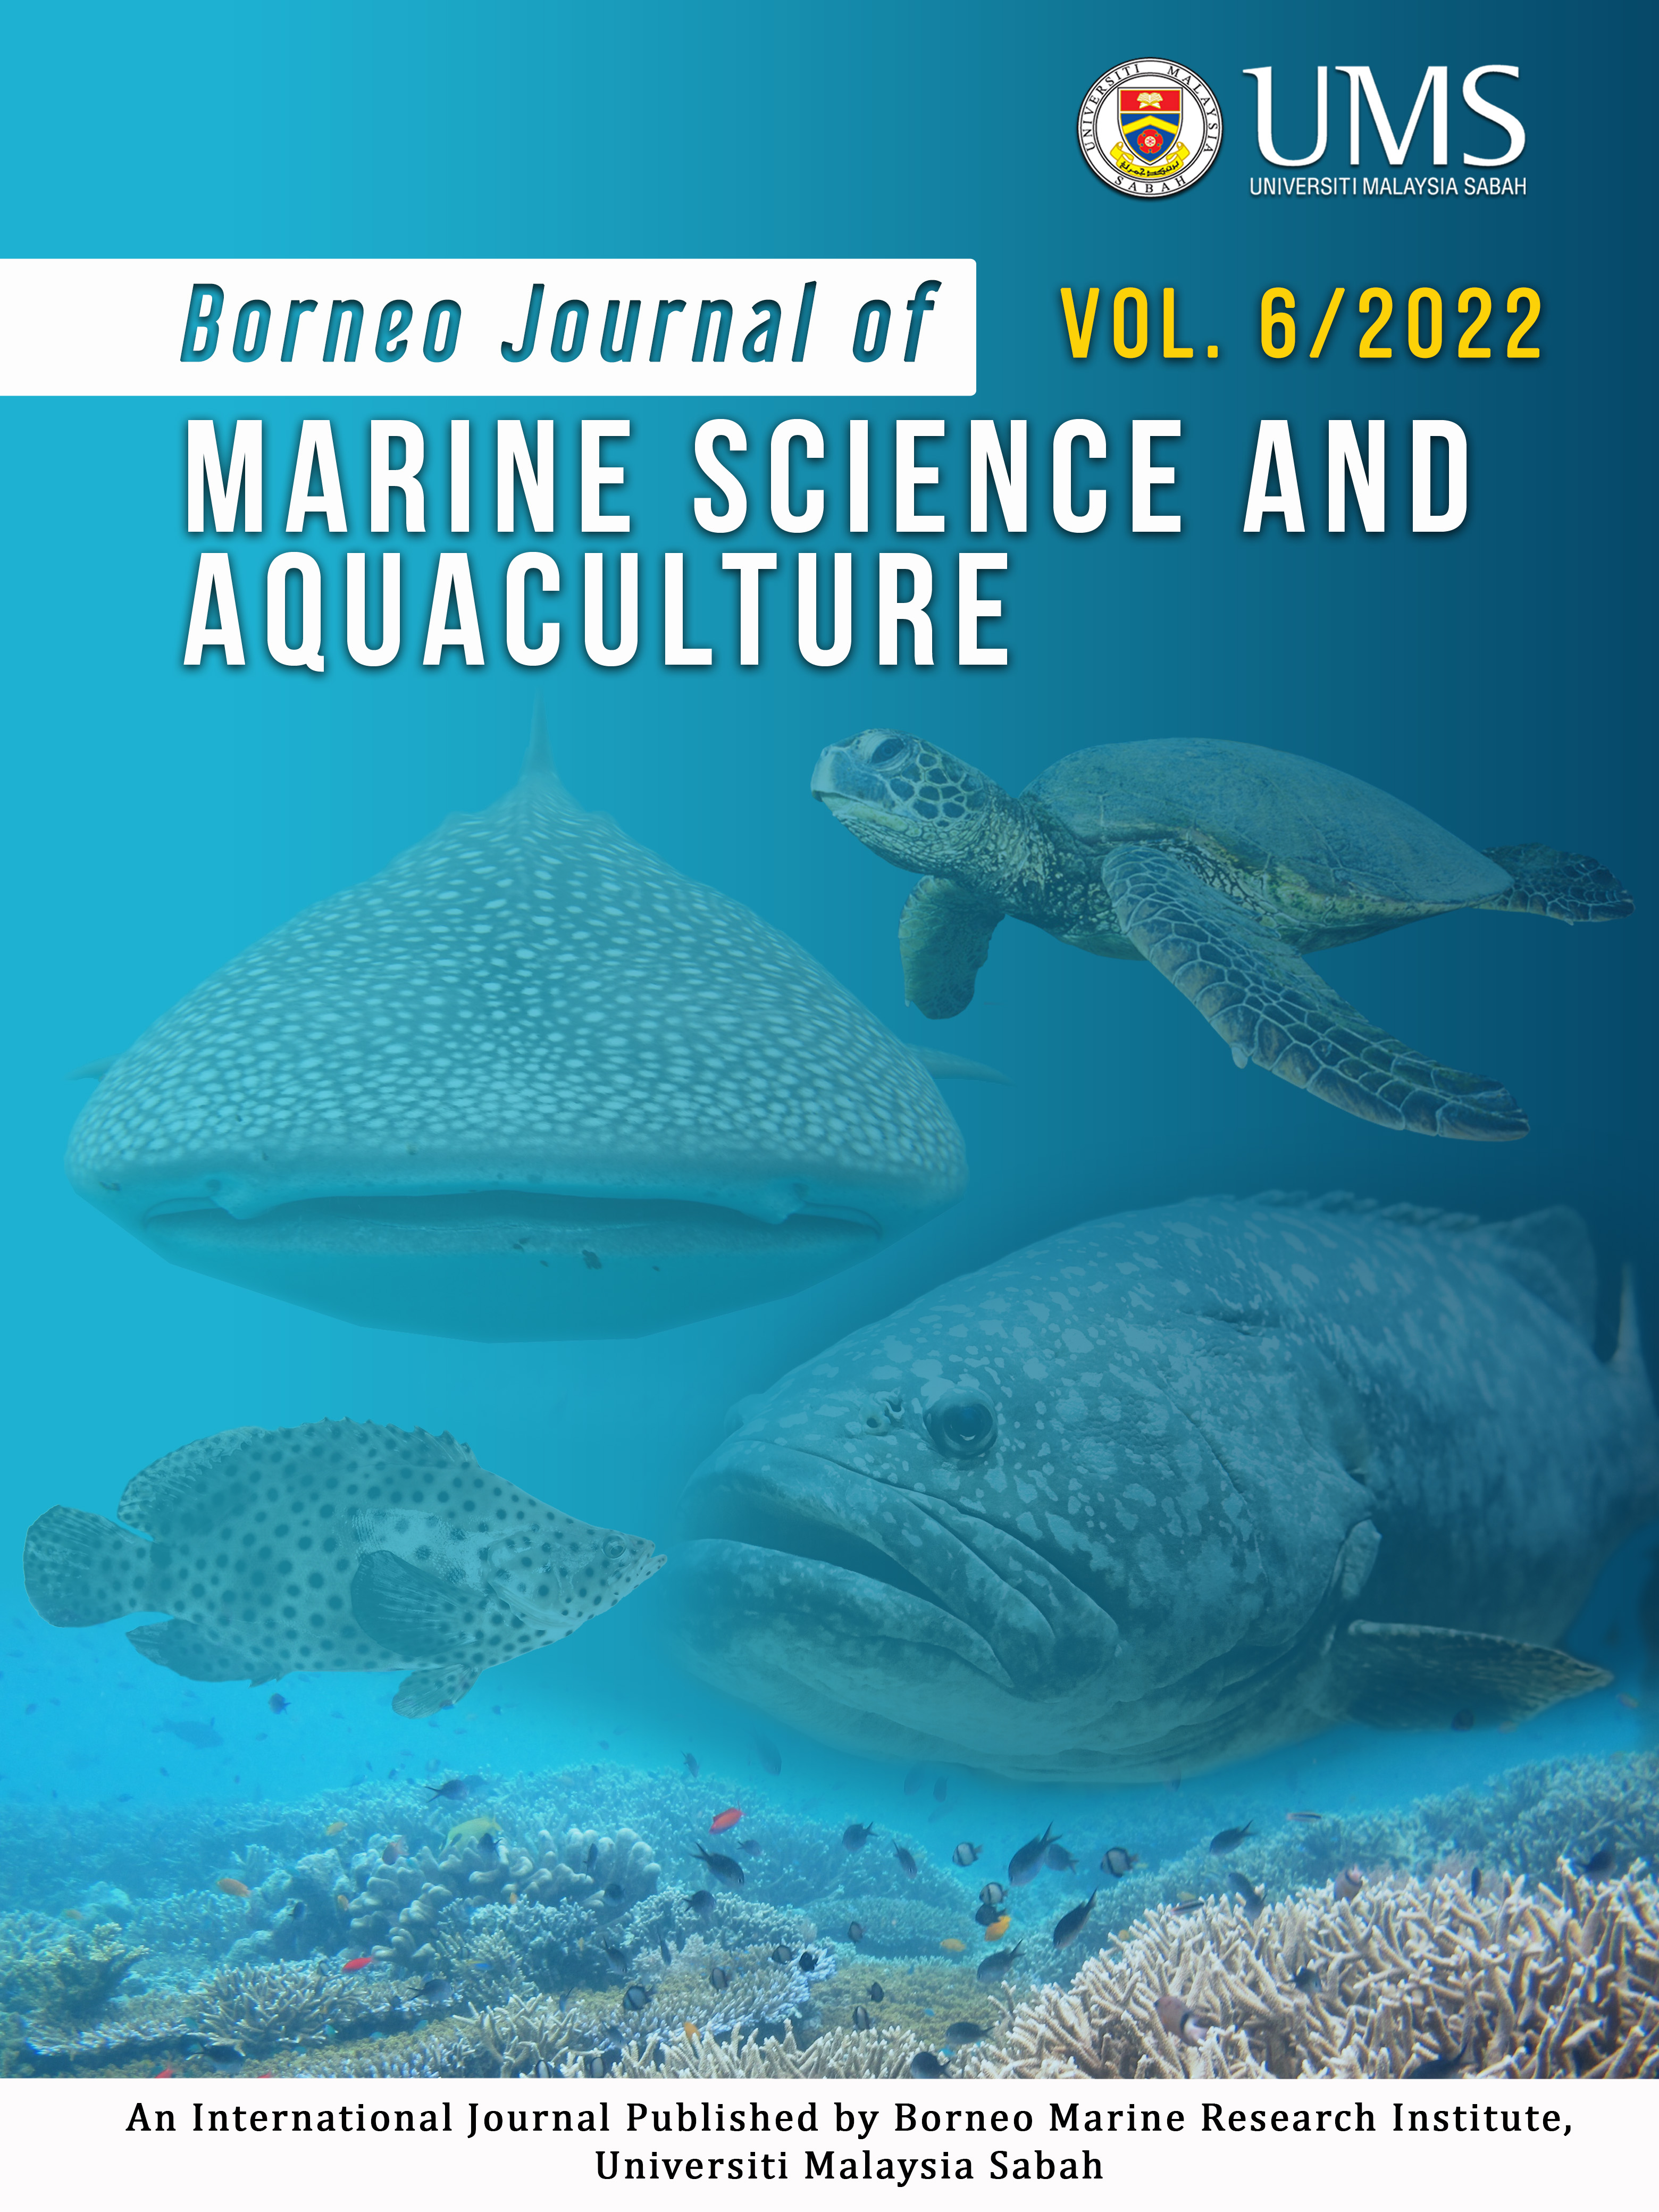 					View Vol. 6 No. 1 (2022): Borneo Journal of Marine Science and Aquaculture
				